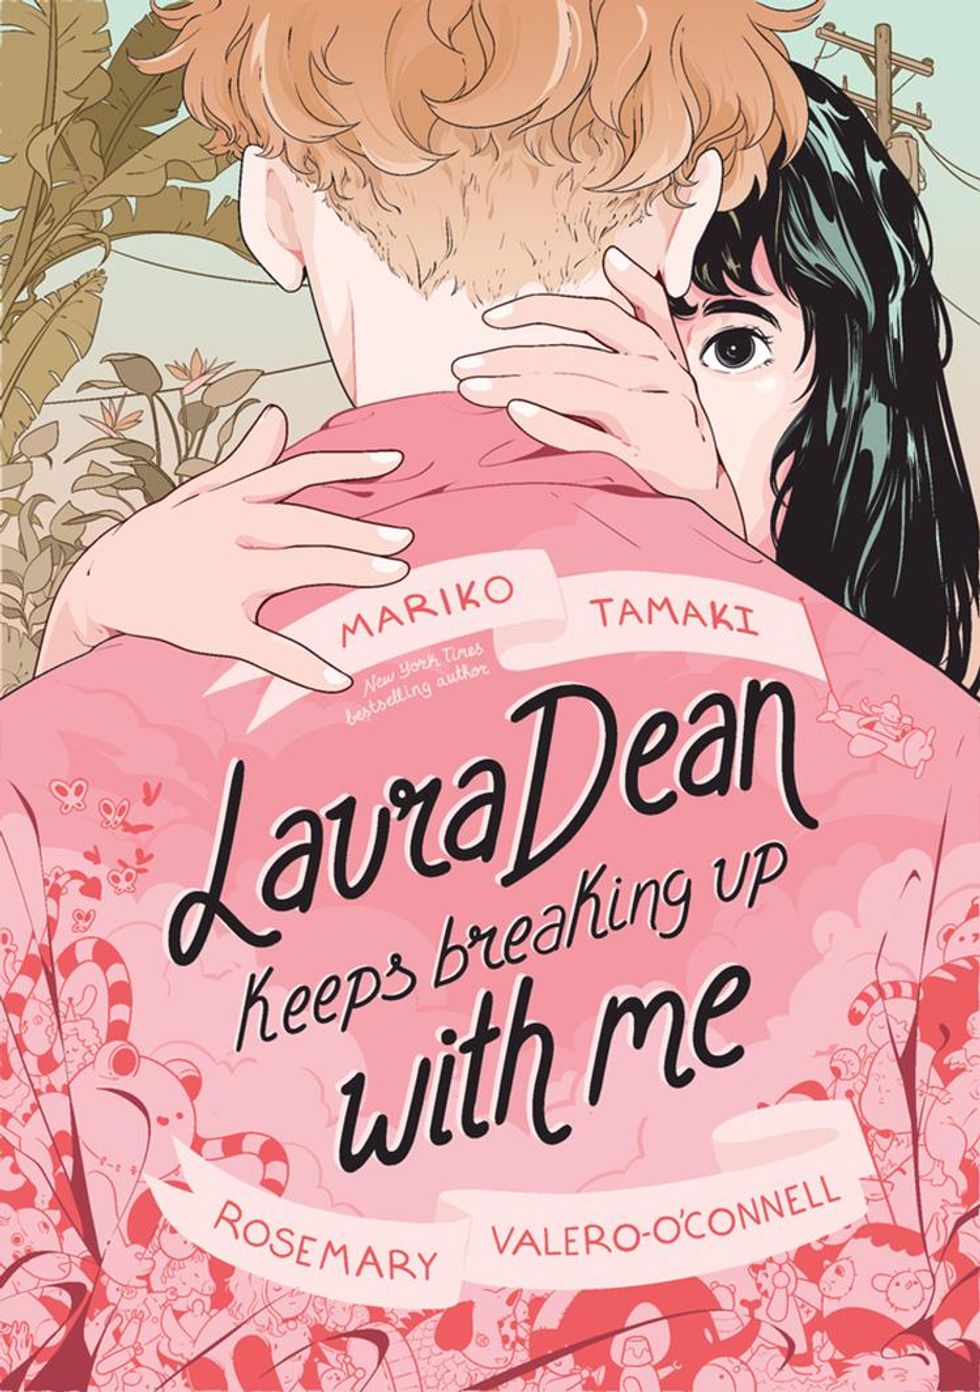 Cover of Laura Dean Keeps Breaking up With Me graphic novel